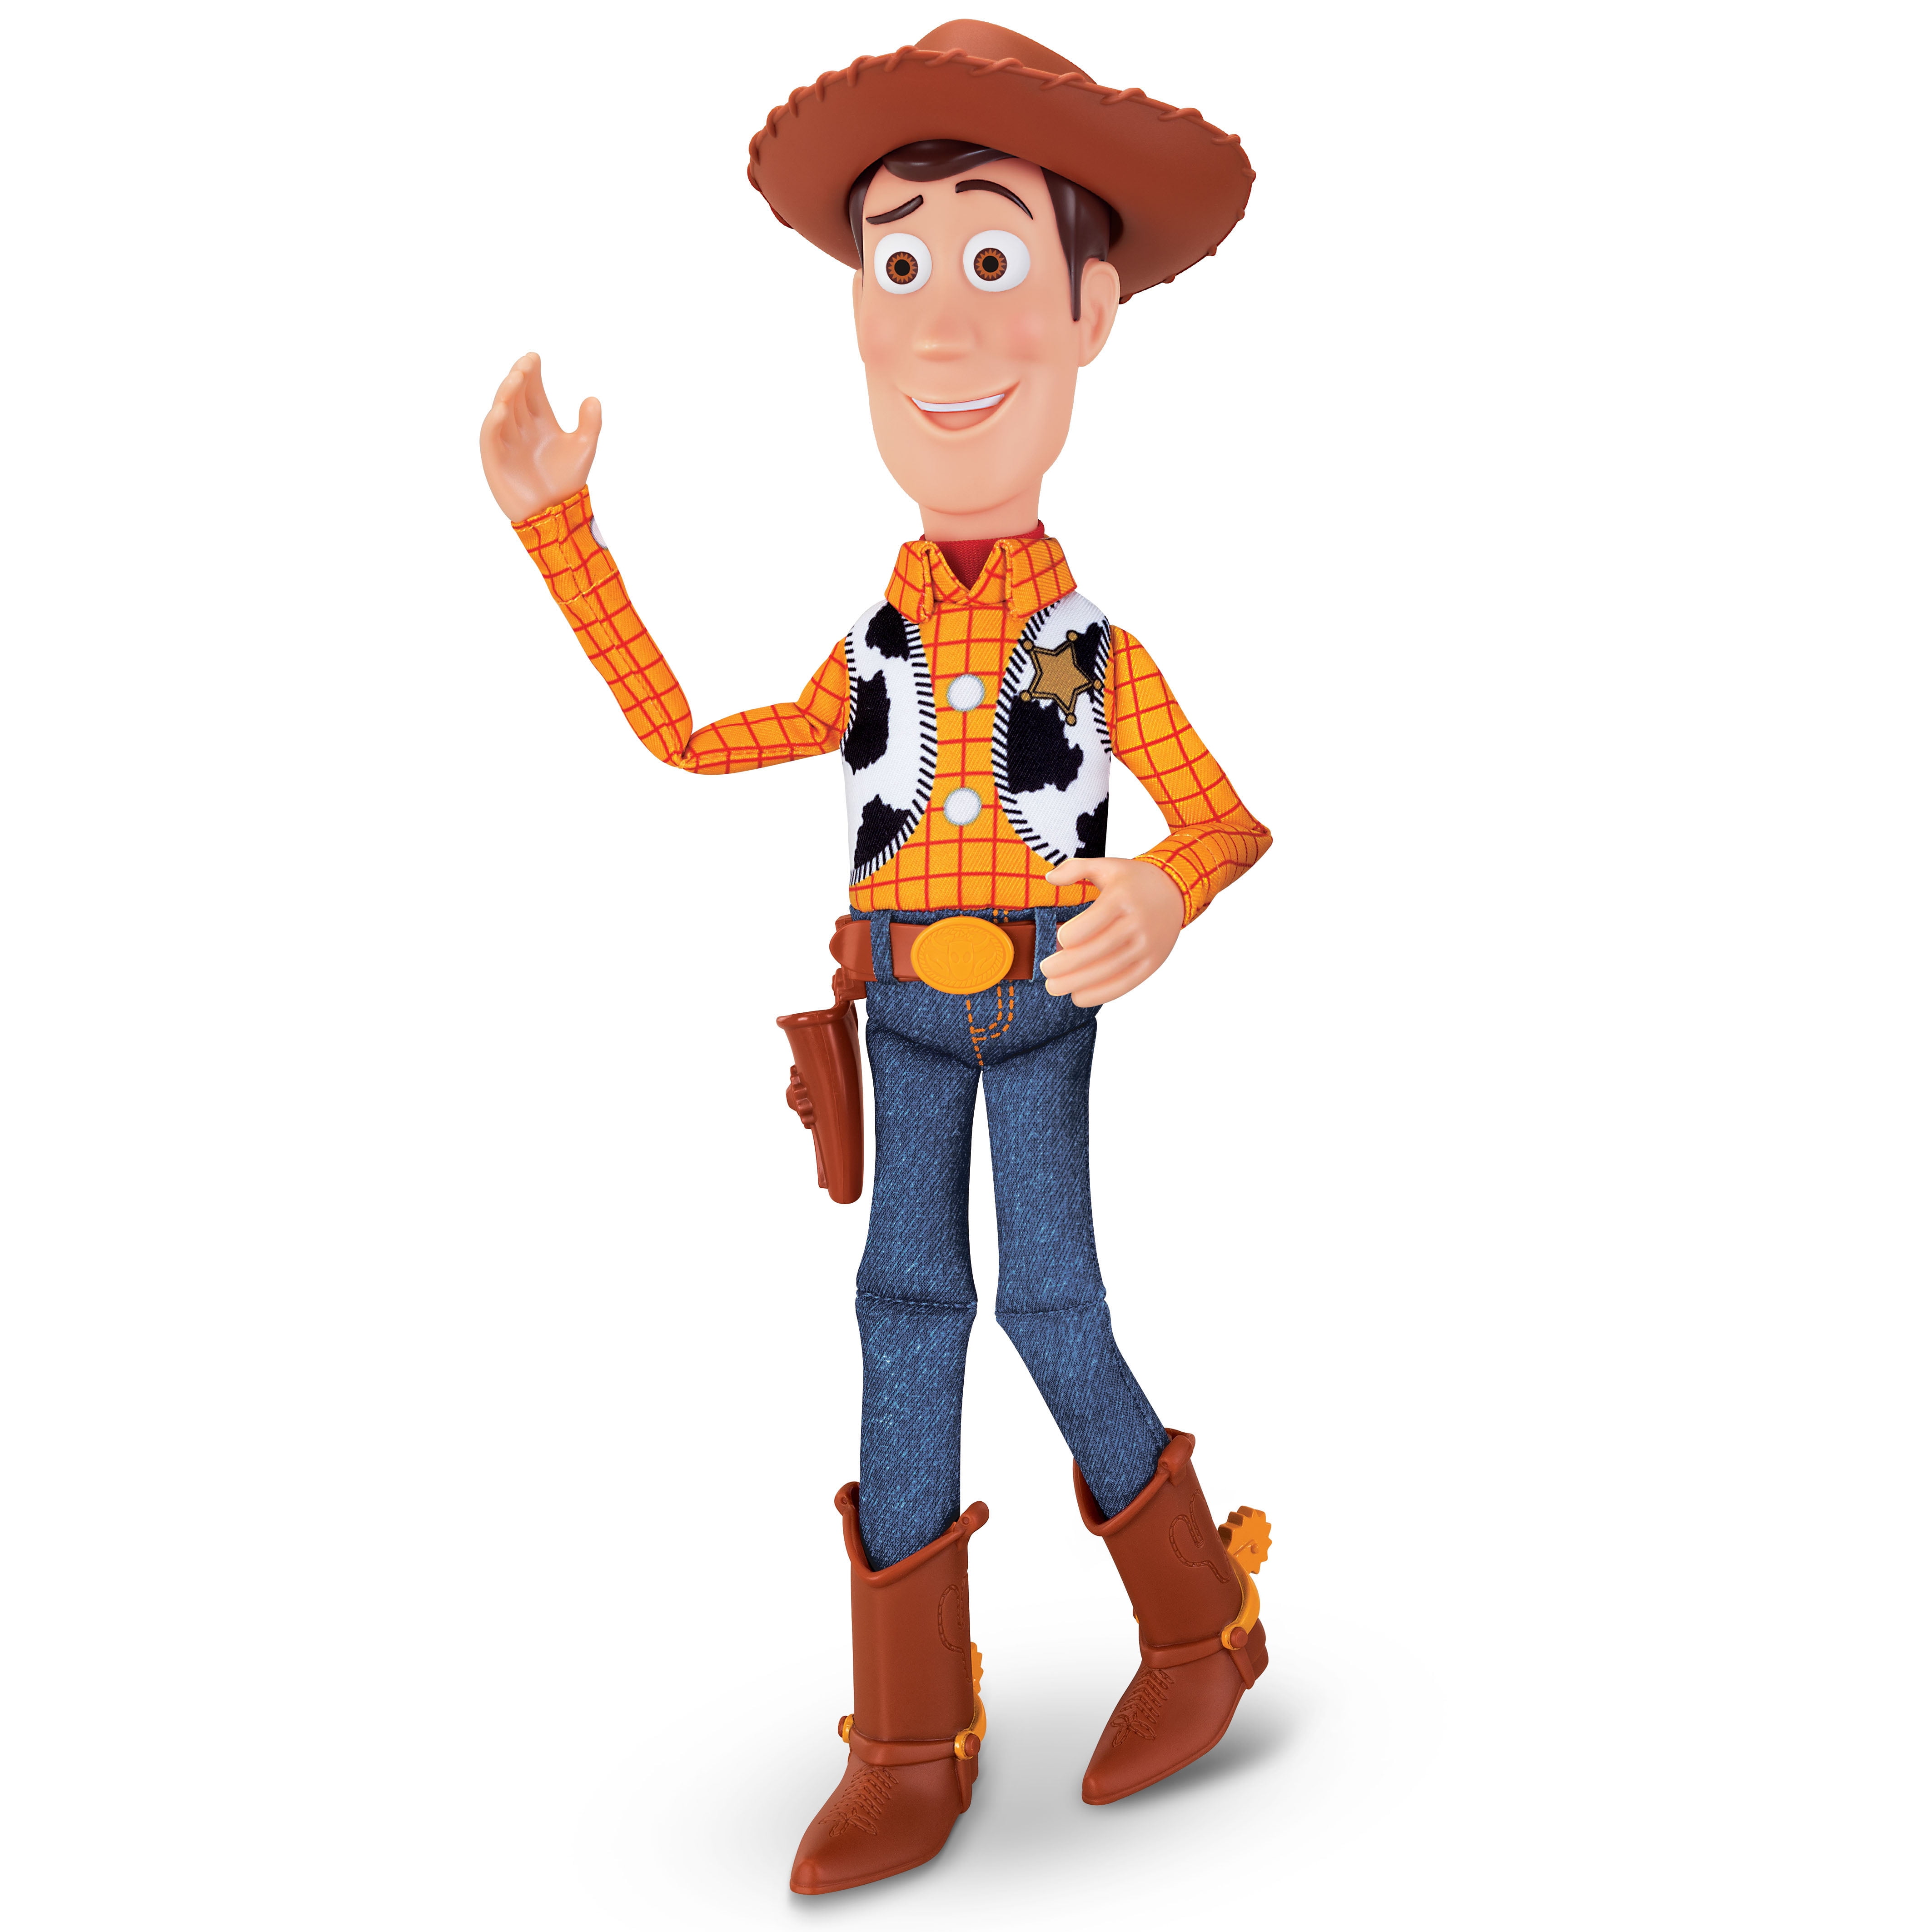 TOY STORY SHERIFF WOODY JESSIE DOLL KID BABY SOFT TALKING ACTION FIGURES TOY 